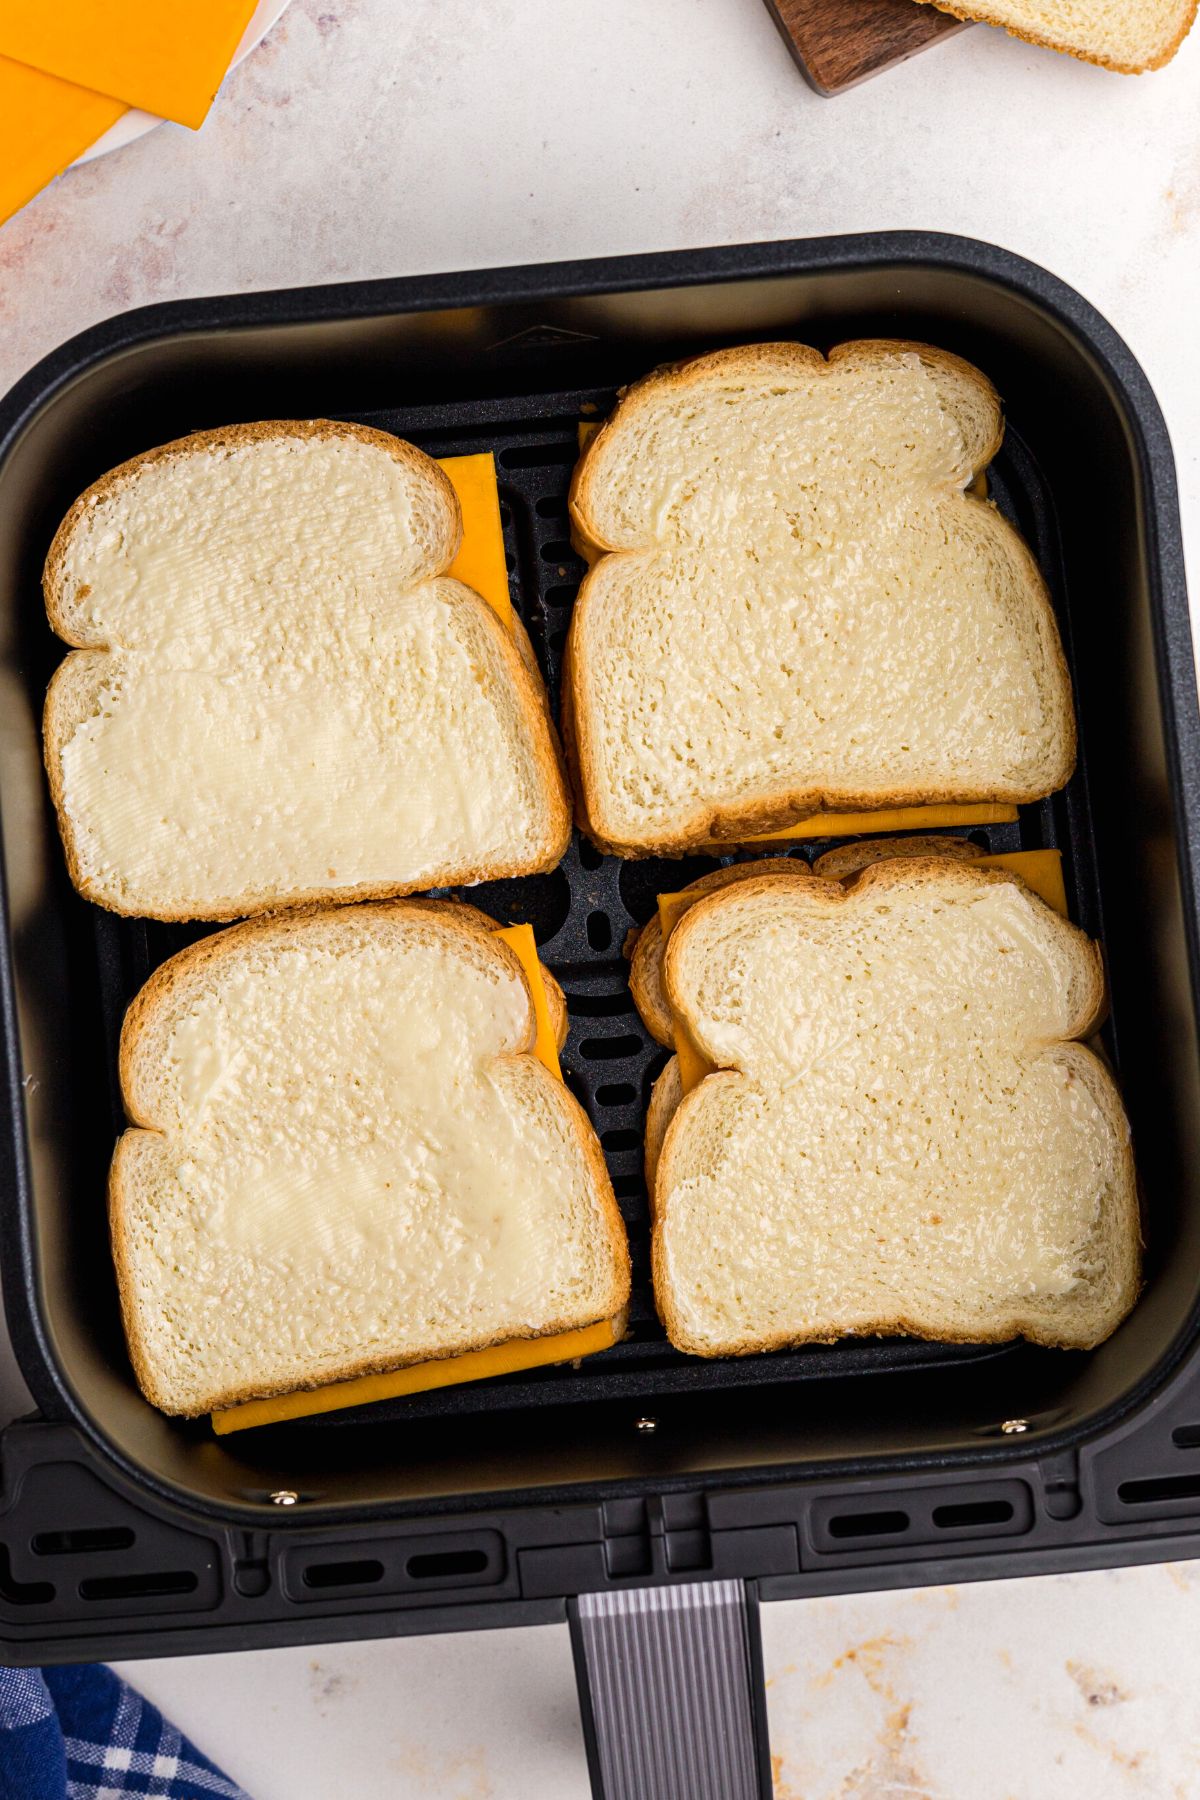 bread slices filled with cheese in the air fryer basket before being cooked